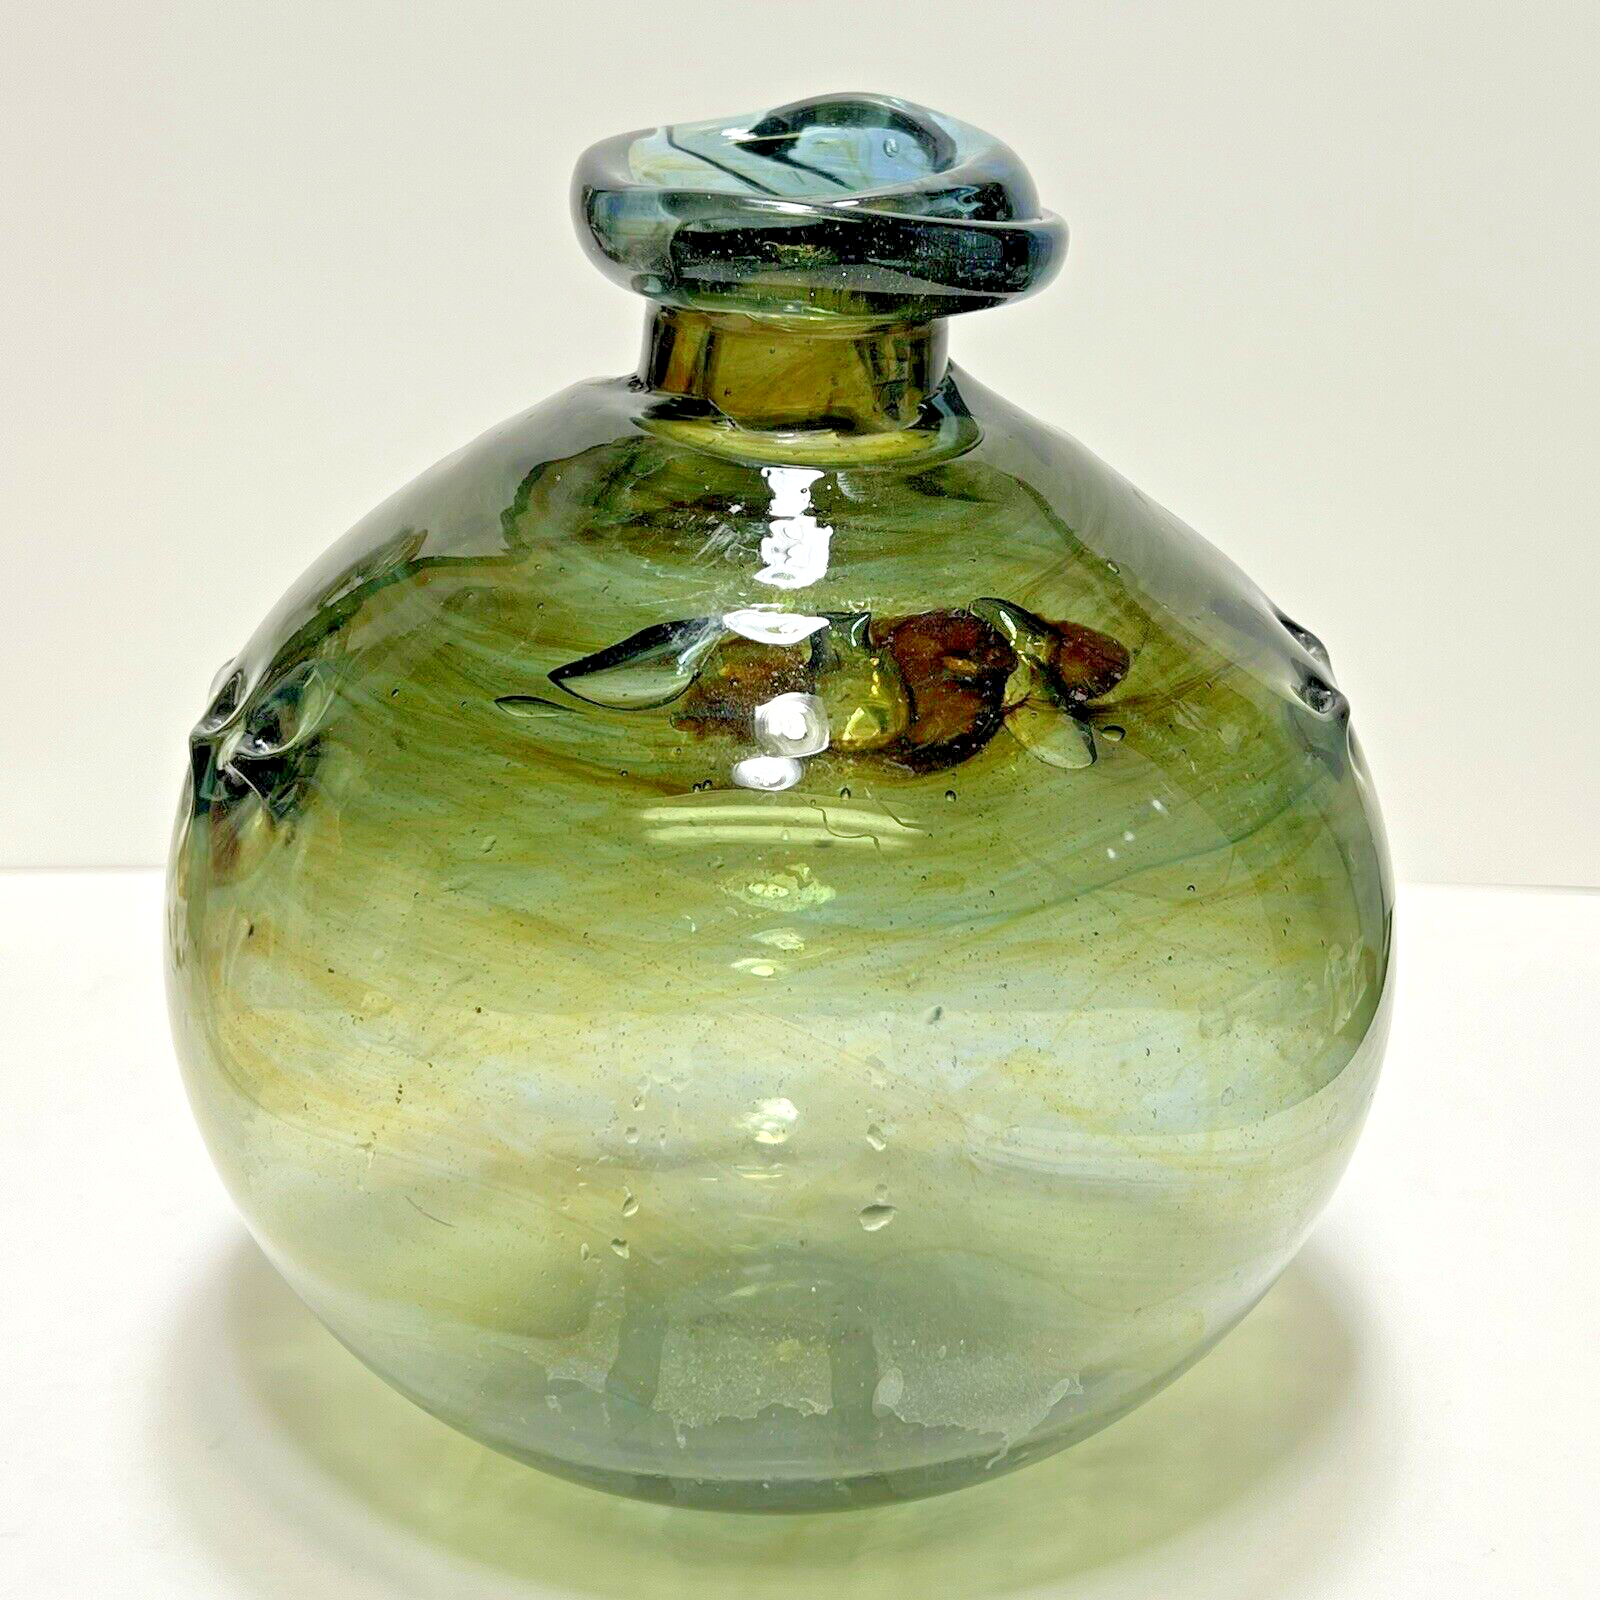 Primary image for Modernist Peter Bramhall Art Glass Pinched Hand Blown Orb Vase Vermont Date 1972